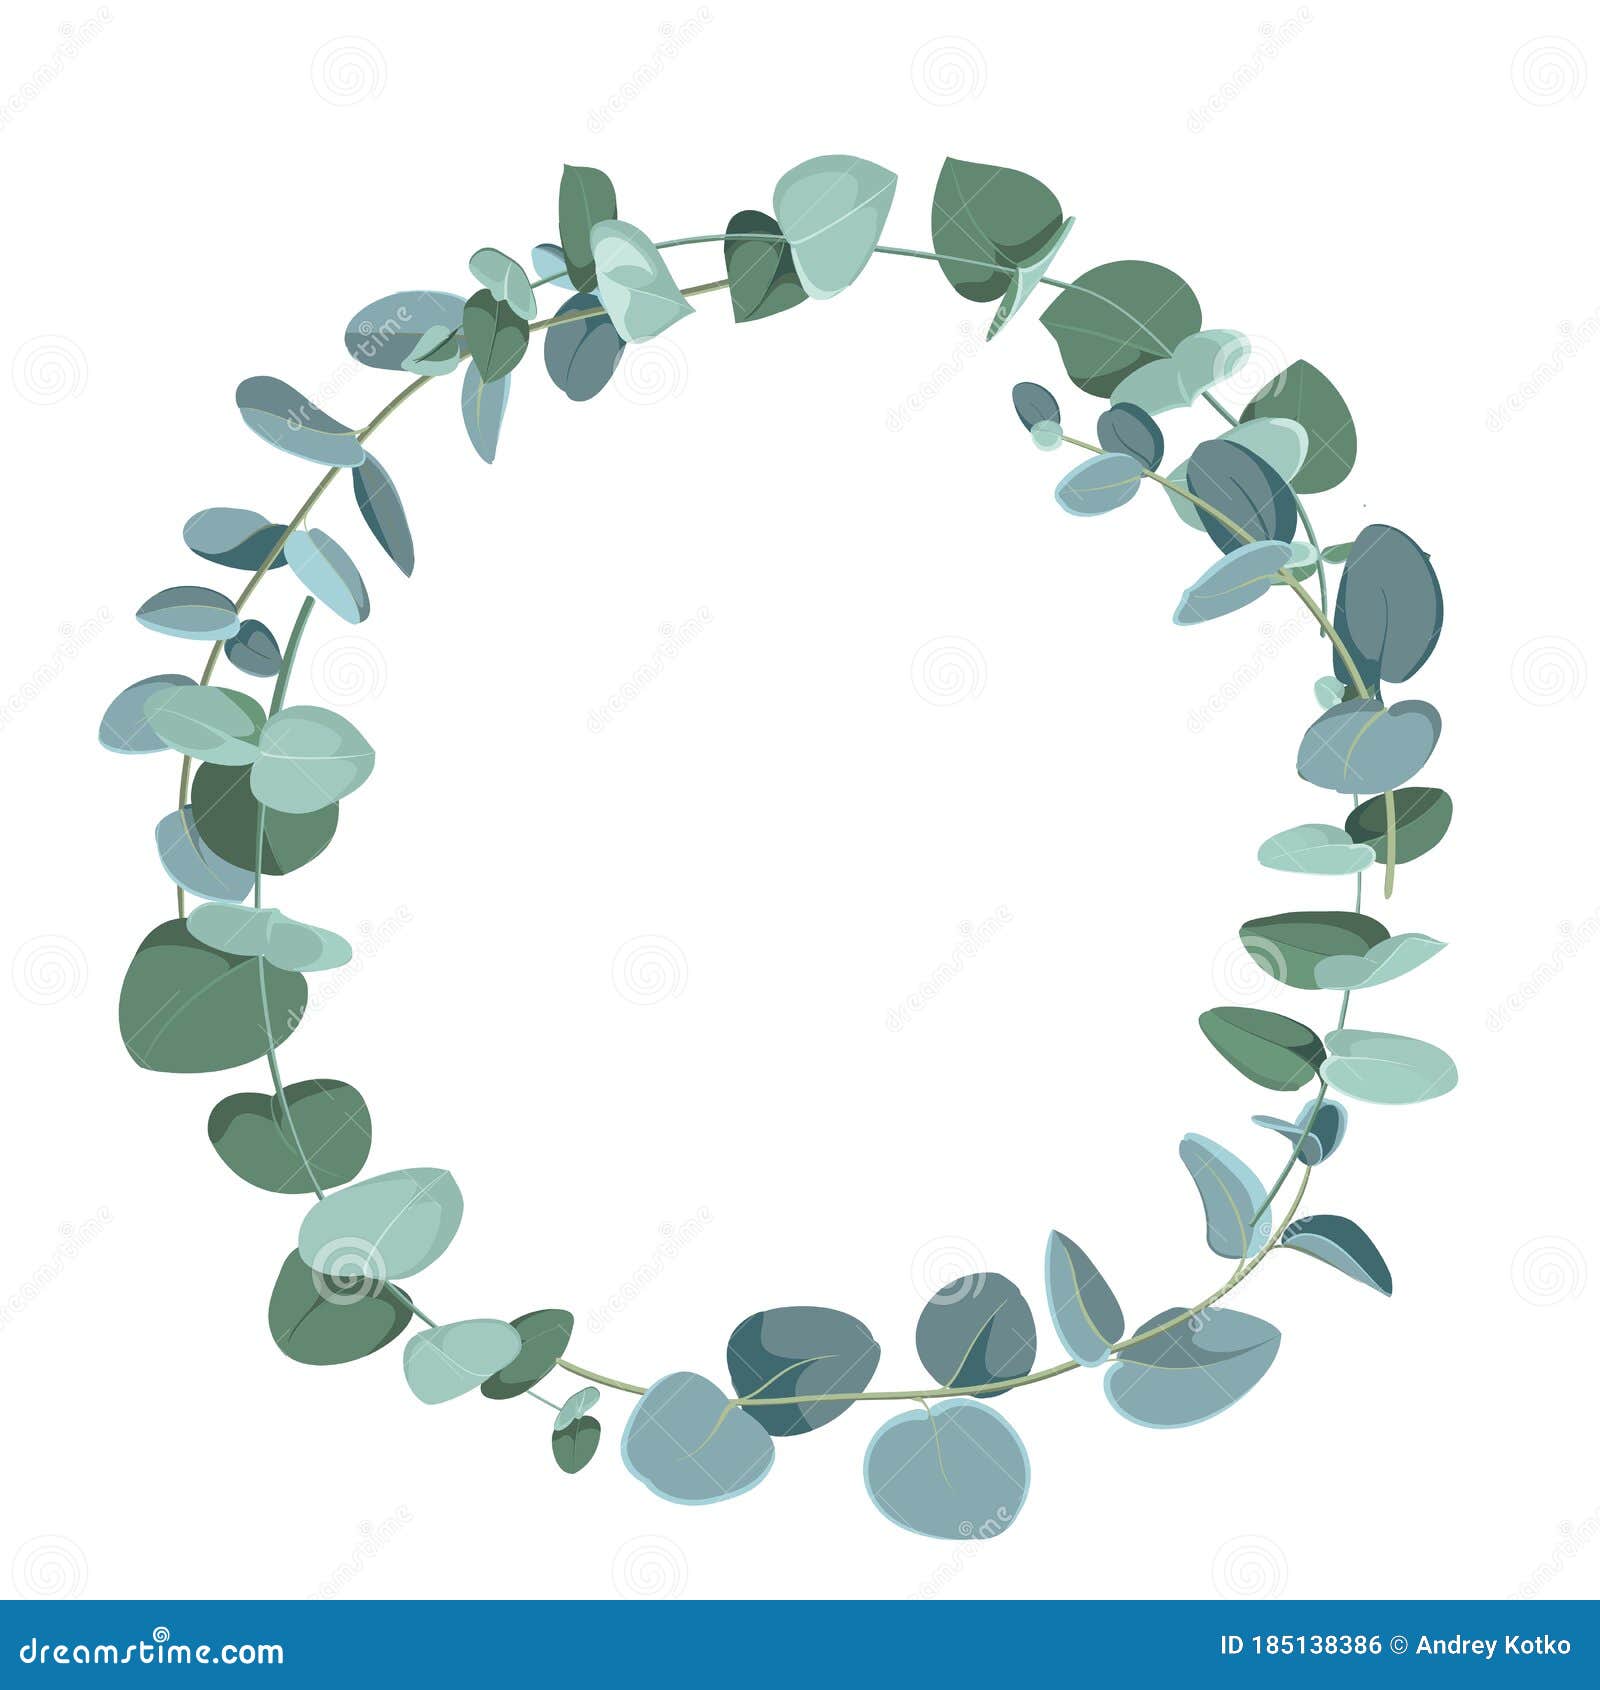 Download Eucalyptus Tropical Plant In Form Of Circle On White ...